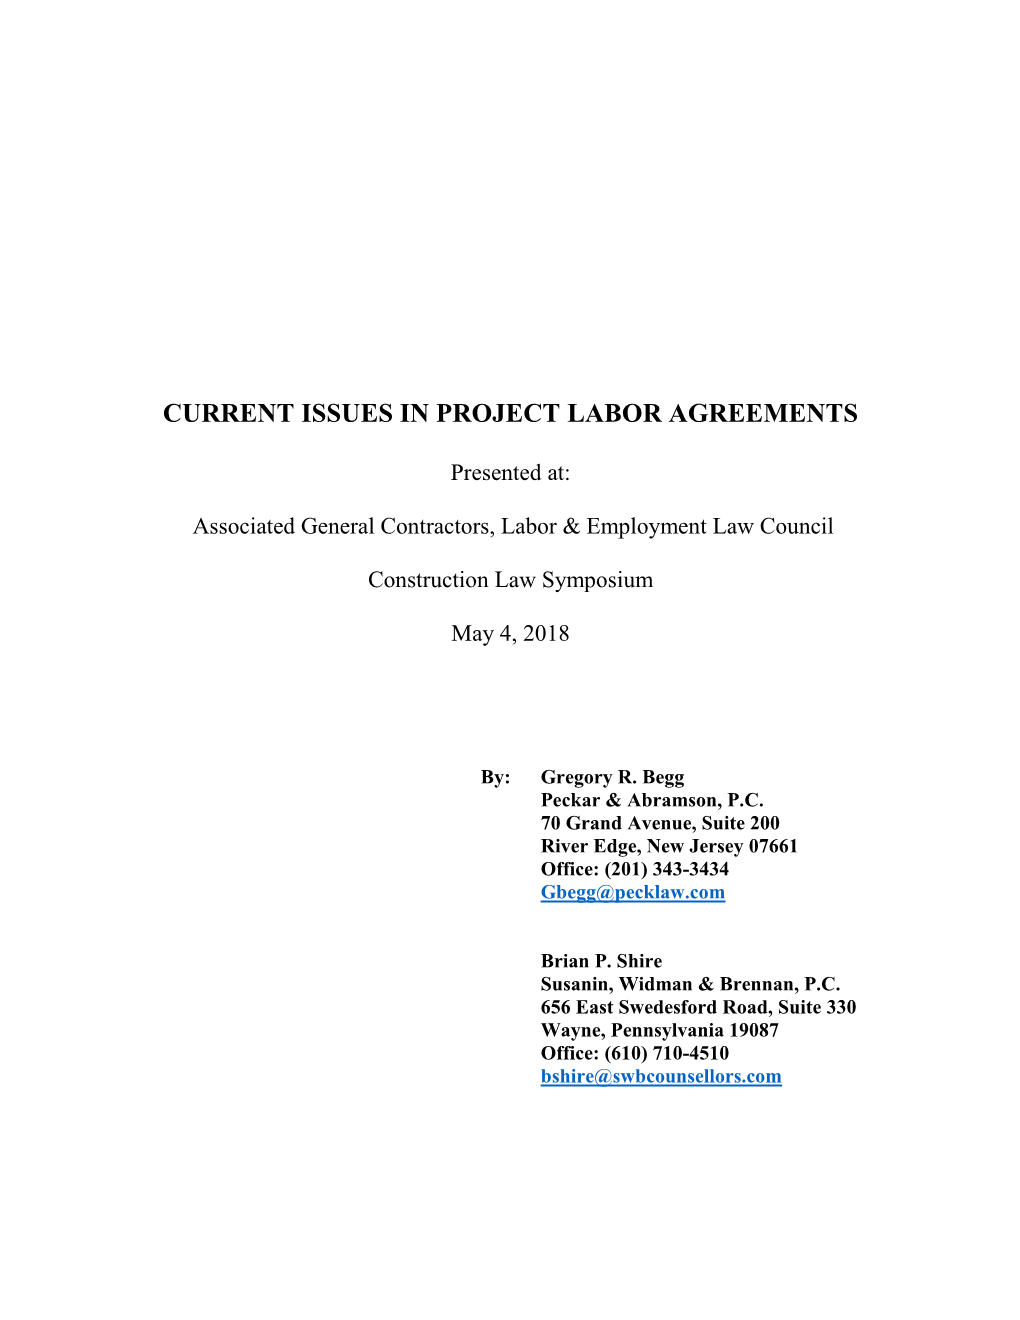 Current Issues in Project Labor Agreements